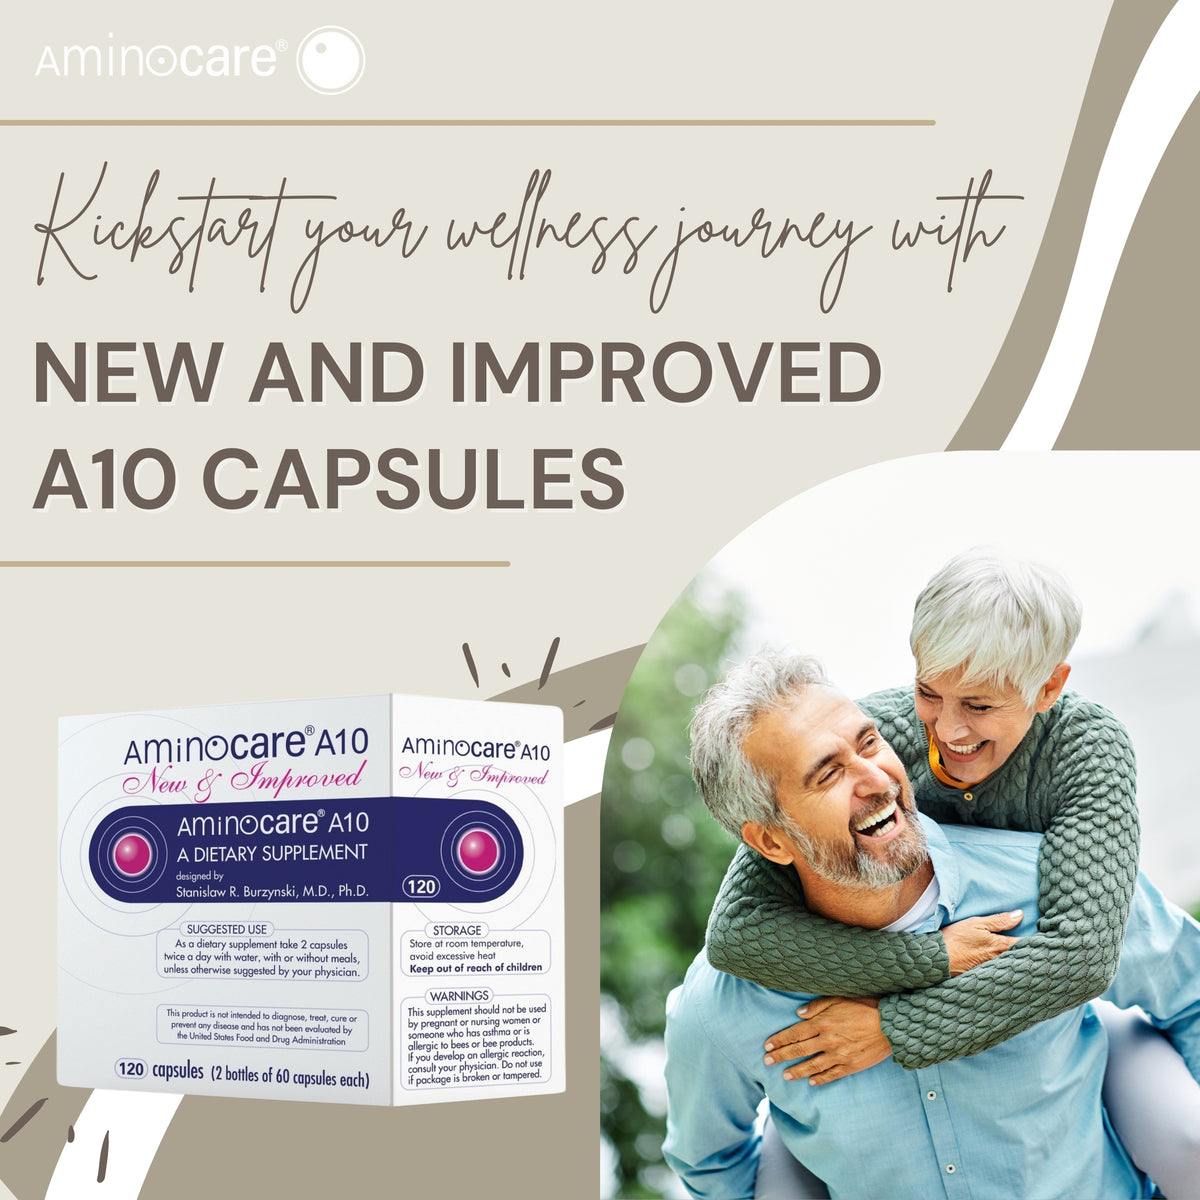 Kickstart Your Wellness Journey with Aminocare® A10 Capsules